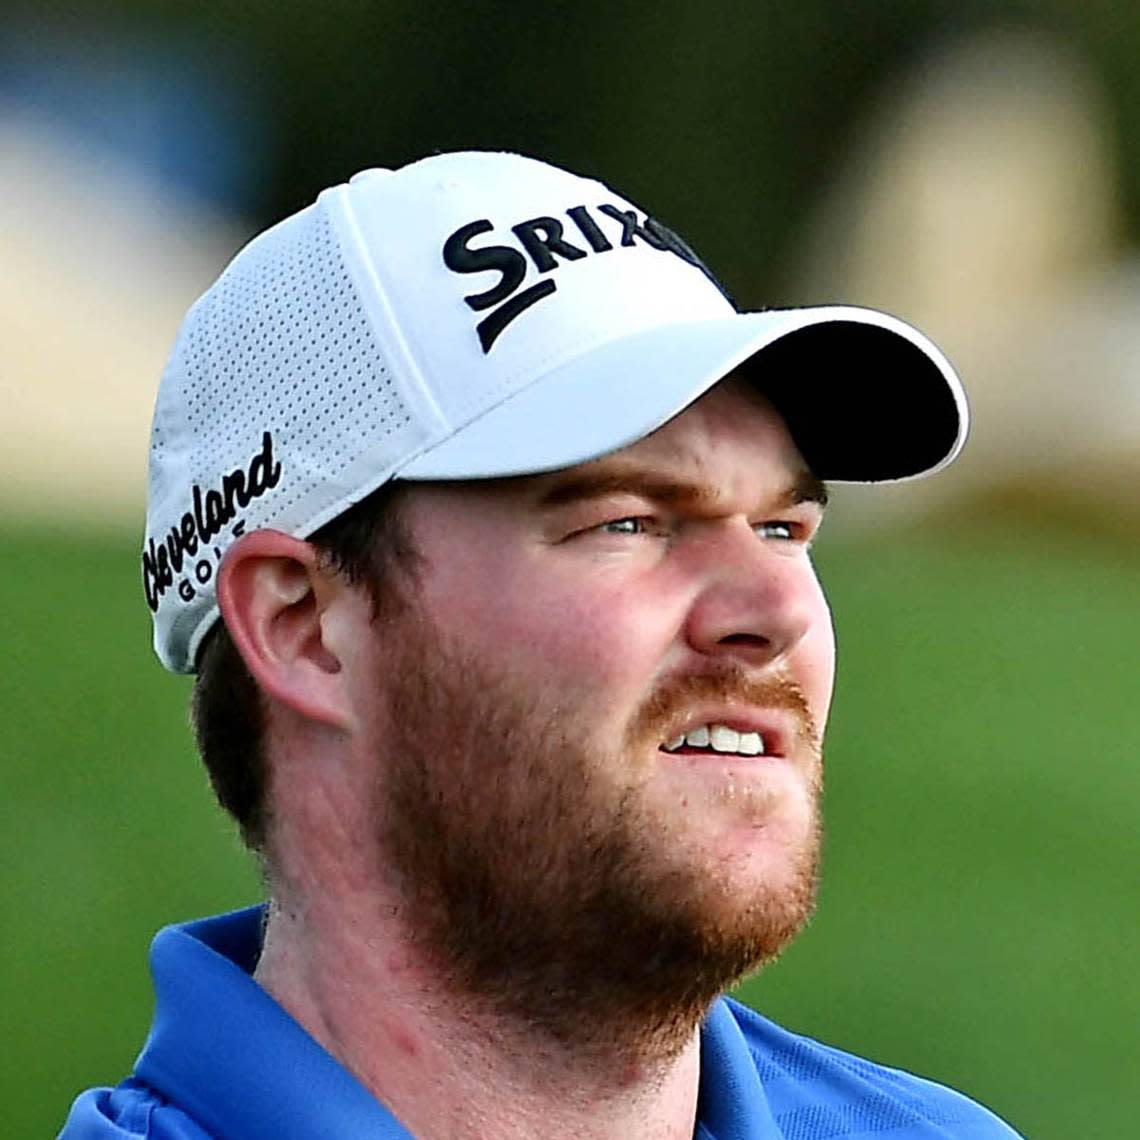 PGA Tour player Grayson Murray at TPC Sawgrass - Stadium Course. Murray, a winner on the Korn Ferry Tour this year, is competing in the Korn Ferry’s UNC Health Championship at Raleigh Country Club..